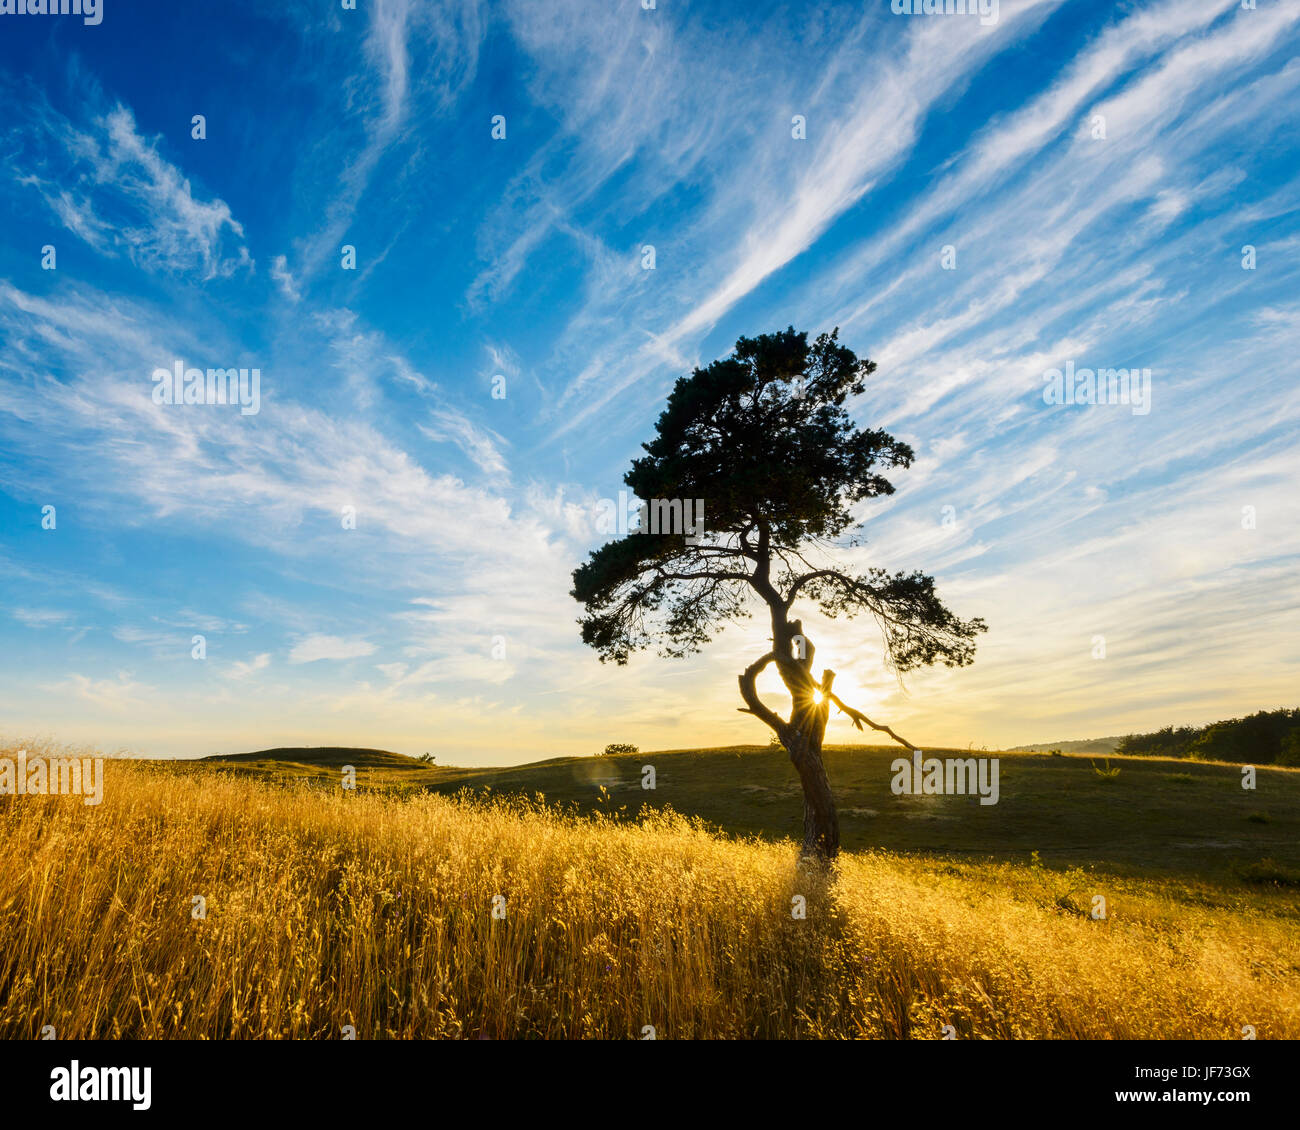 Pine tree in field at sunset Stock Photo